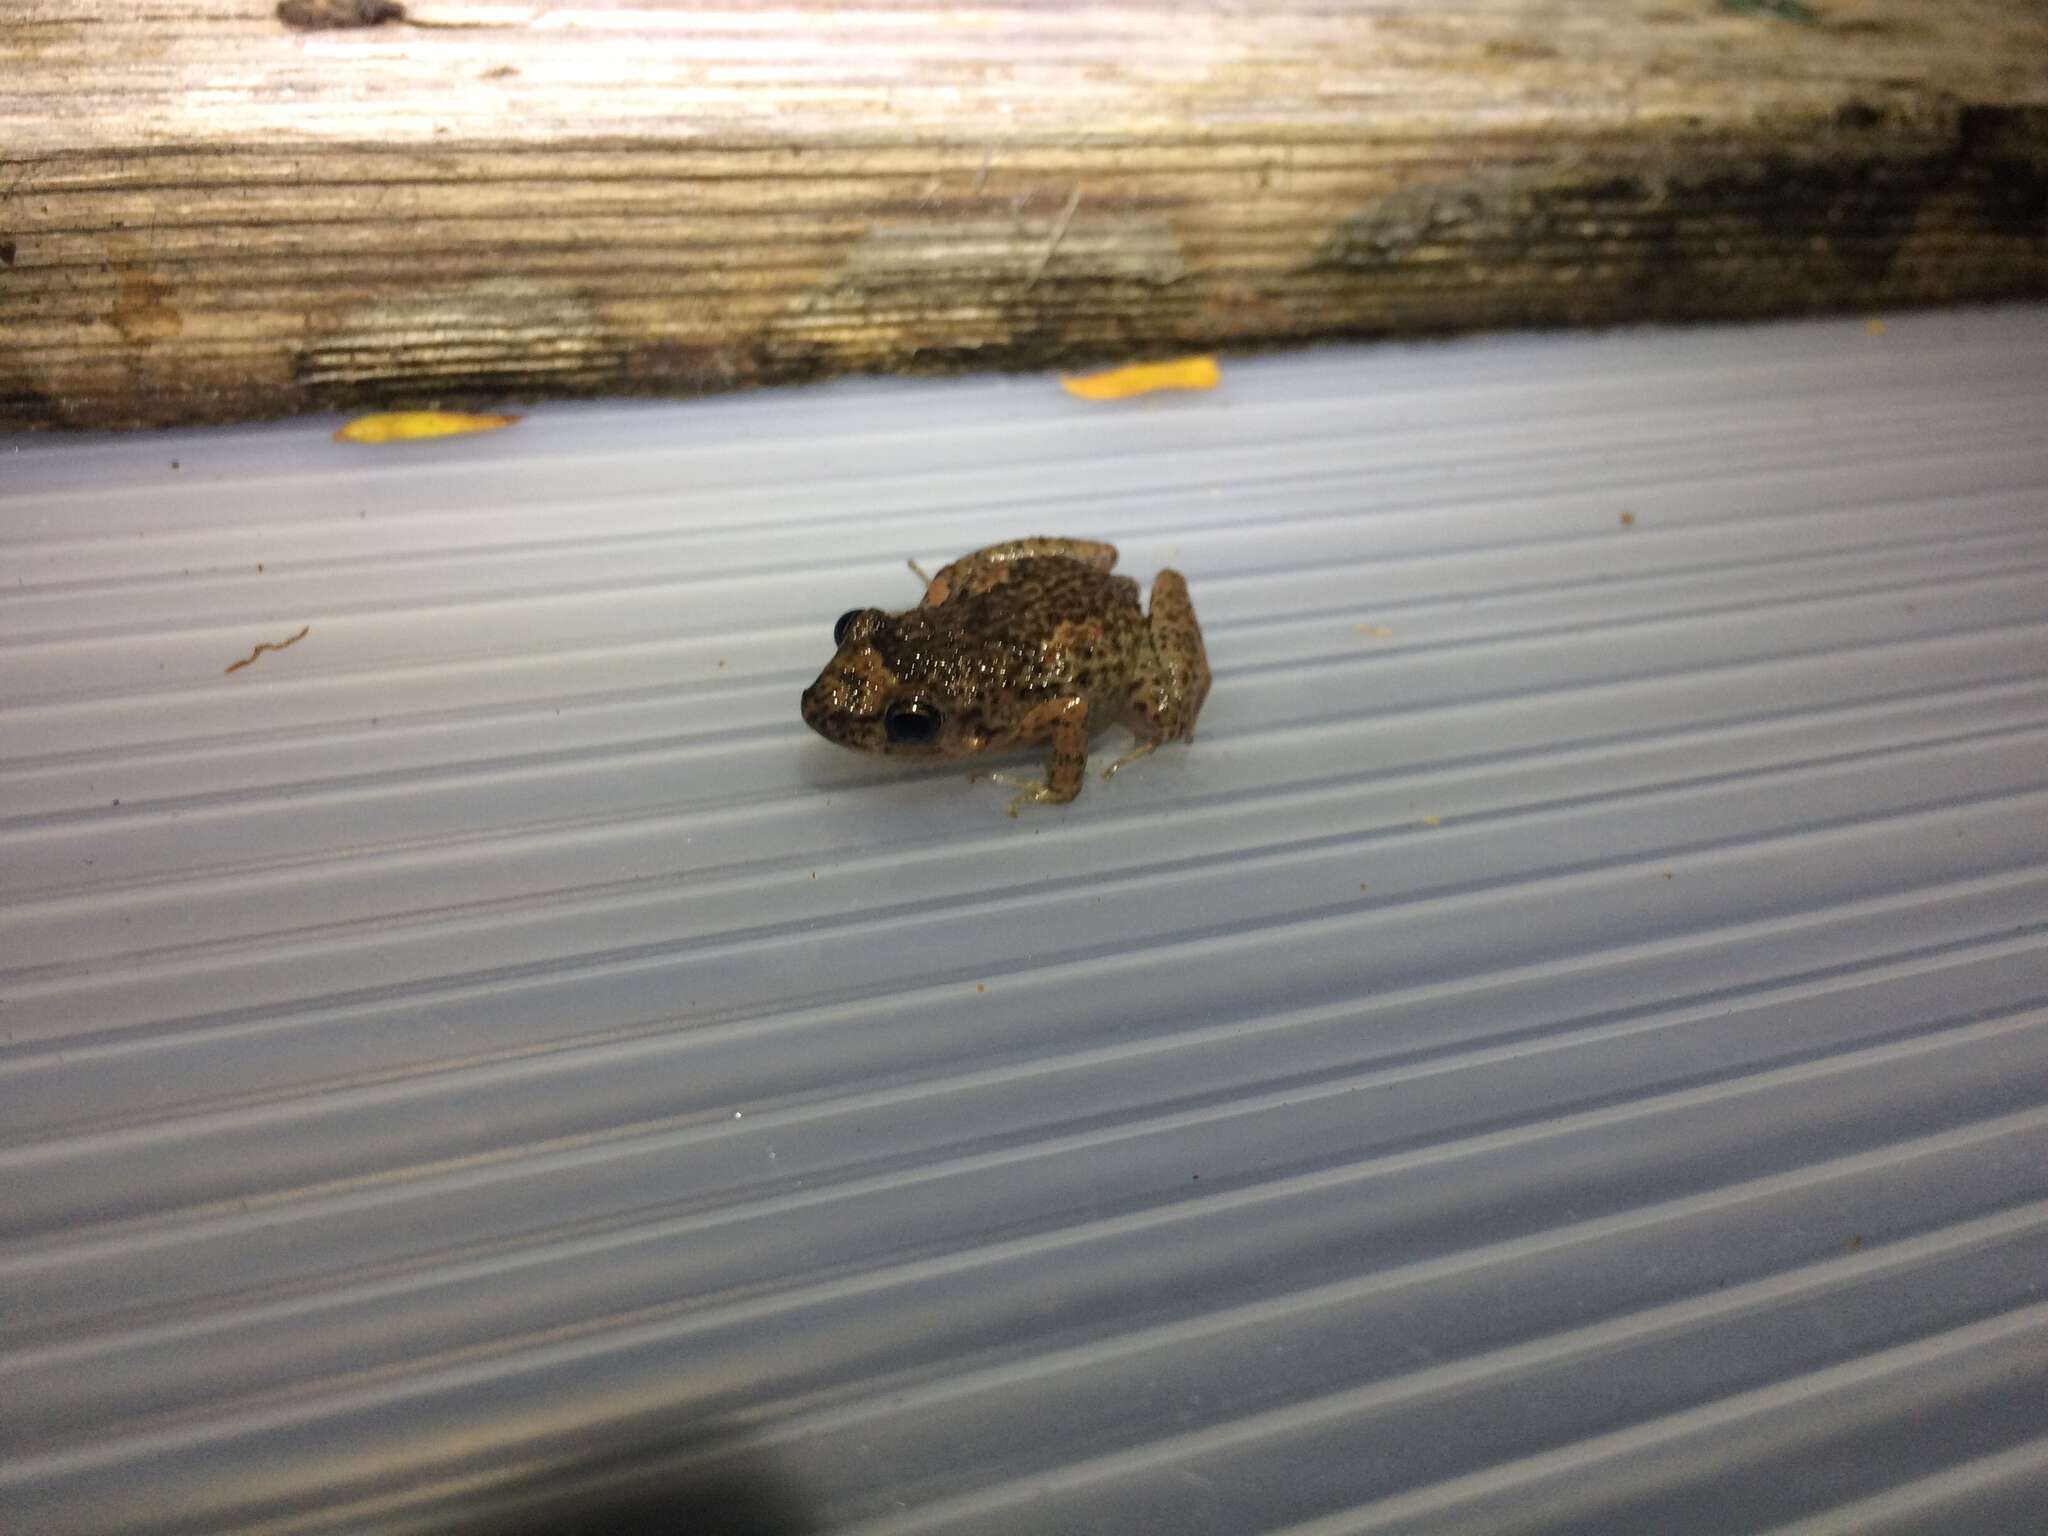 Image of Greenhouse Frog